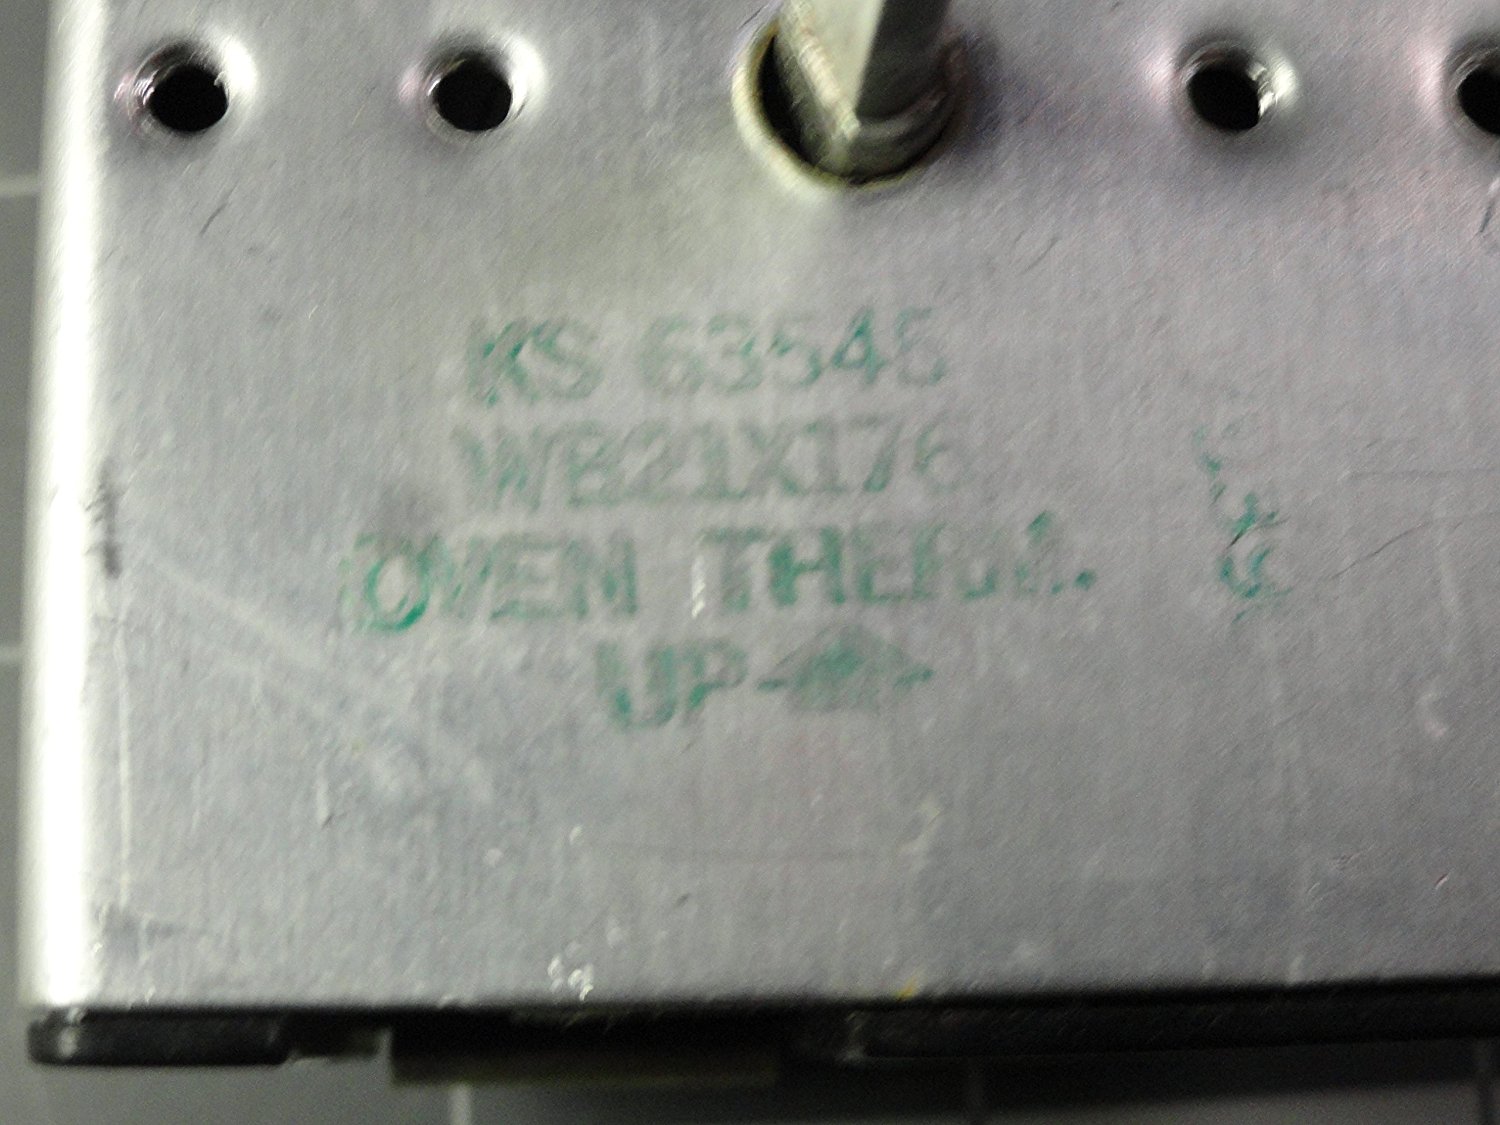 WB21X176 GE Oven Thermostat/Responder N2 free image download